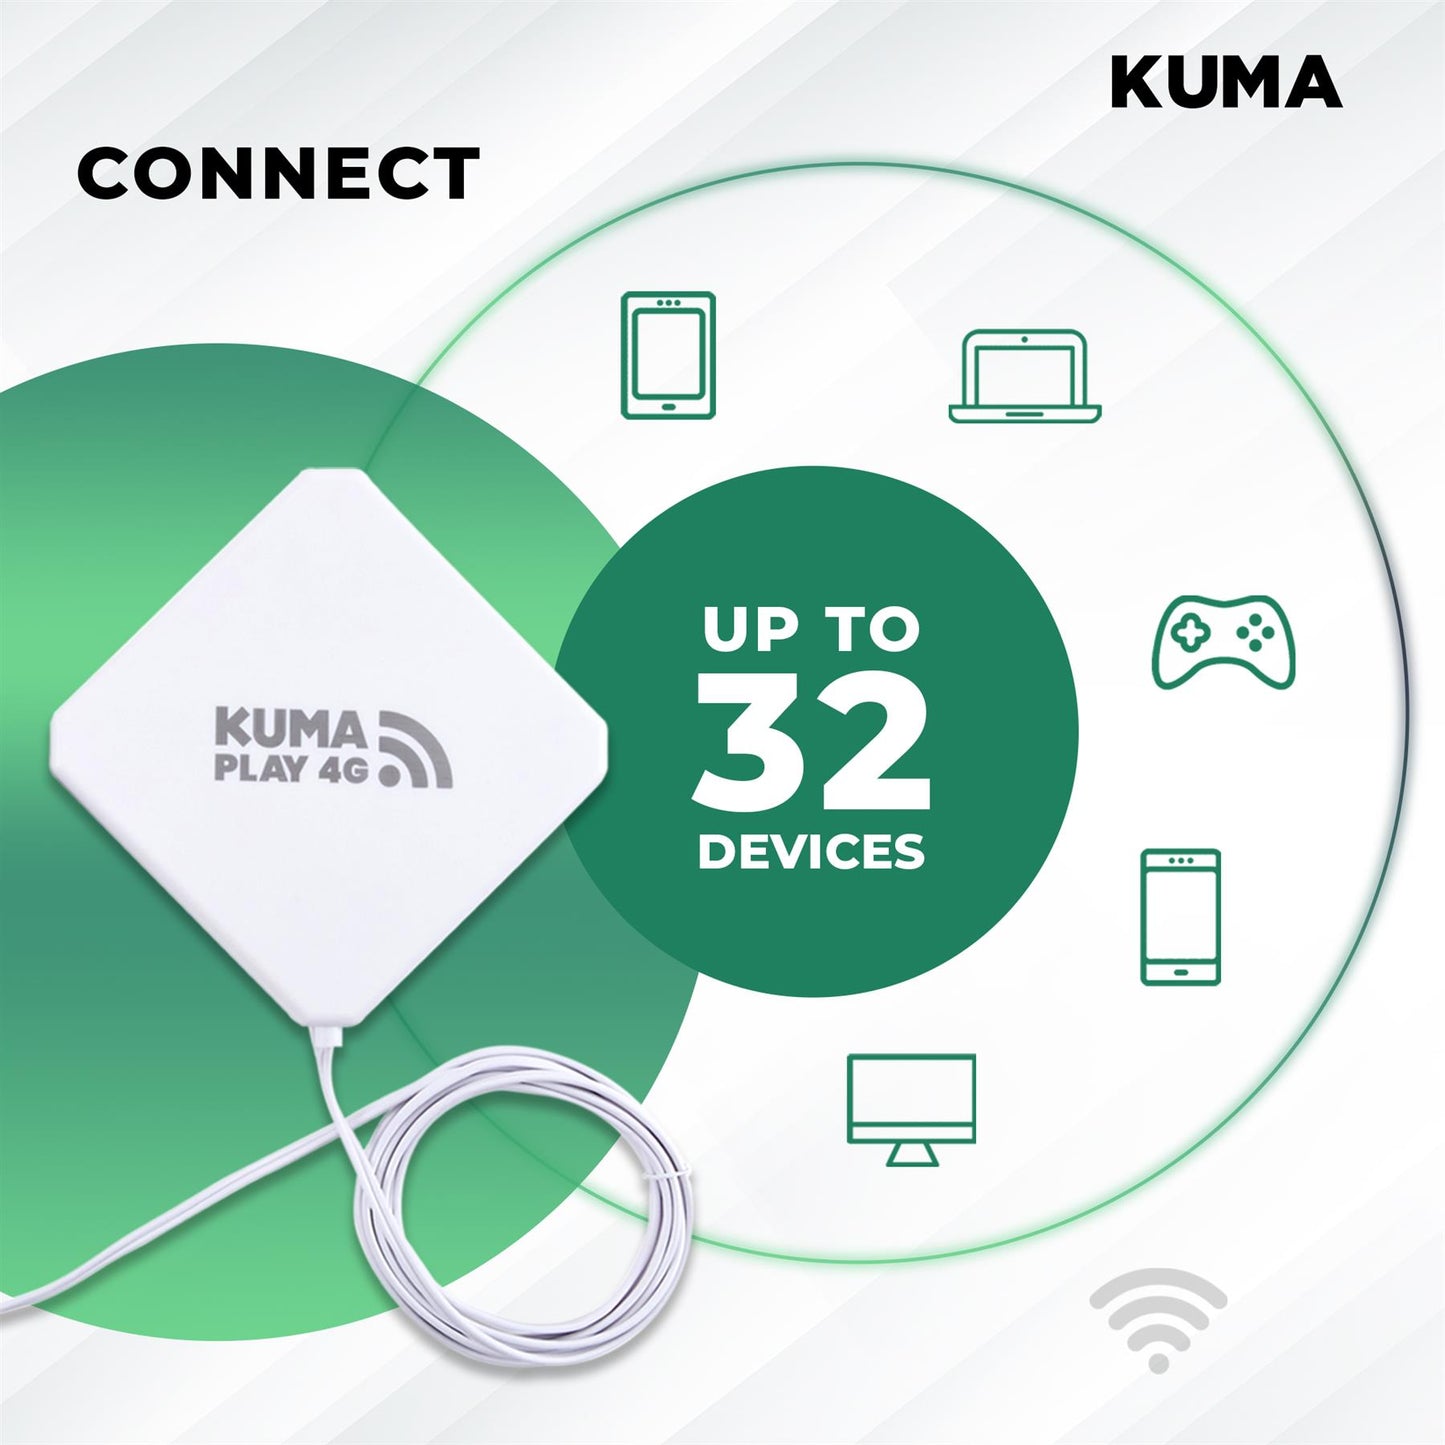 KUMA CONNECT PLAY - SIM Unlocked LiTE 4G Router with Indoor PLAY Antenna - Turn 4G LTE Signal into Wifi Internet Hotspot for House Garden Office Caravan Motorhome Boat - Wireless Device Booster Kit